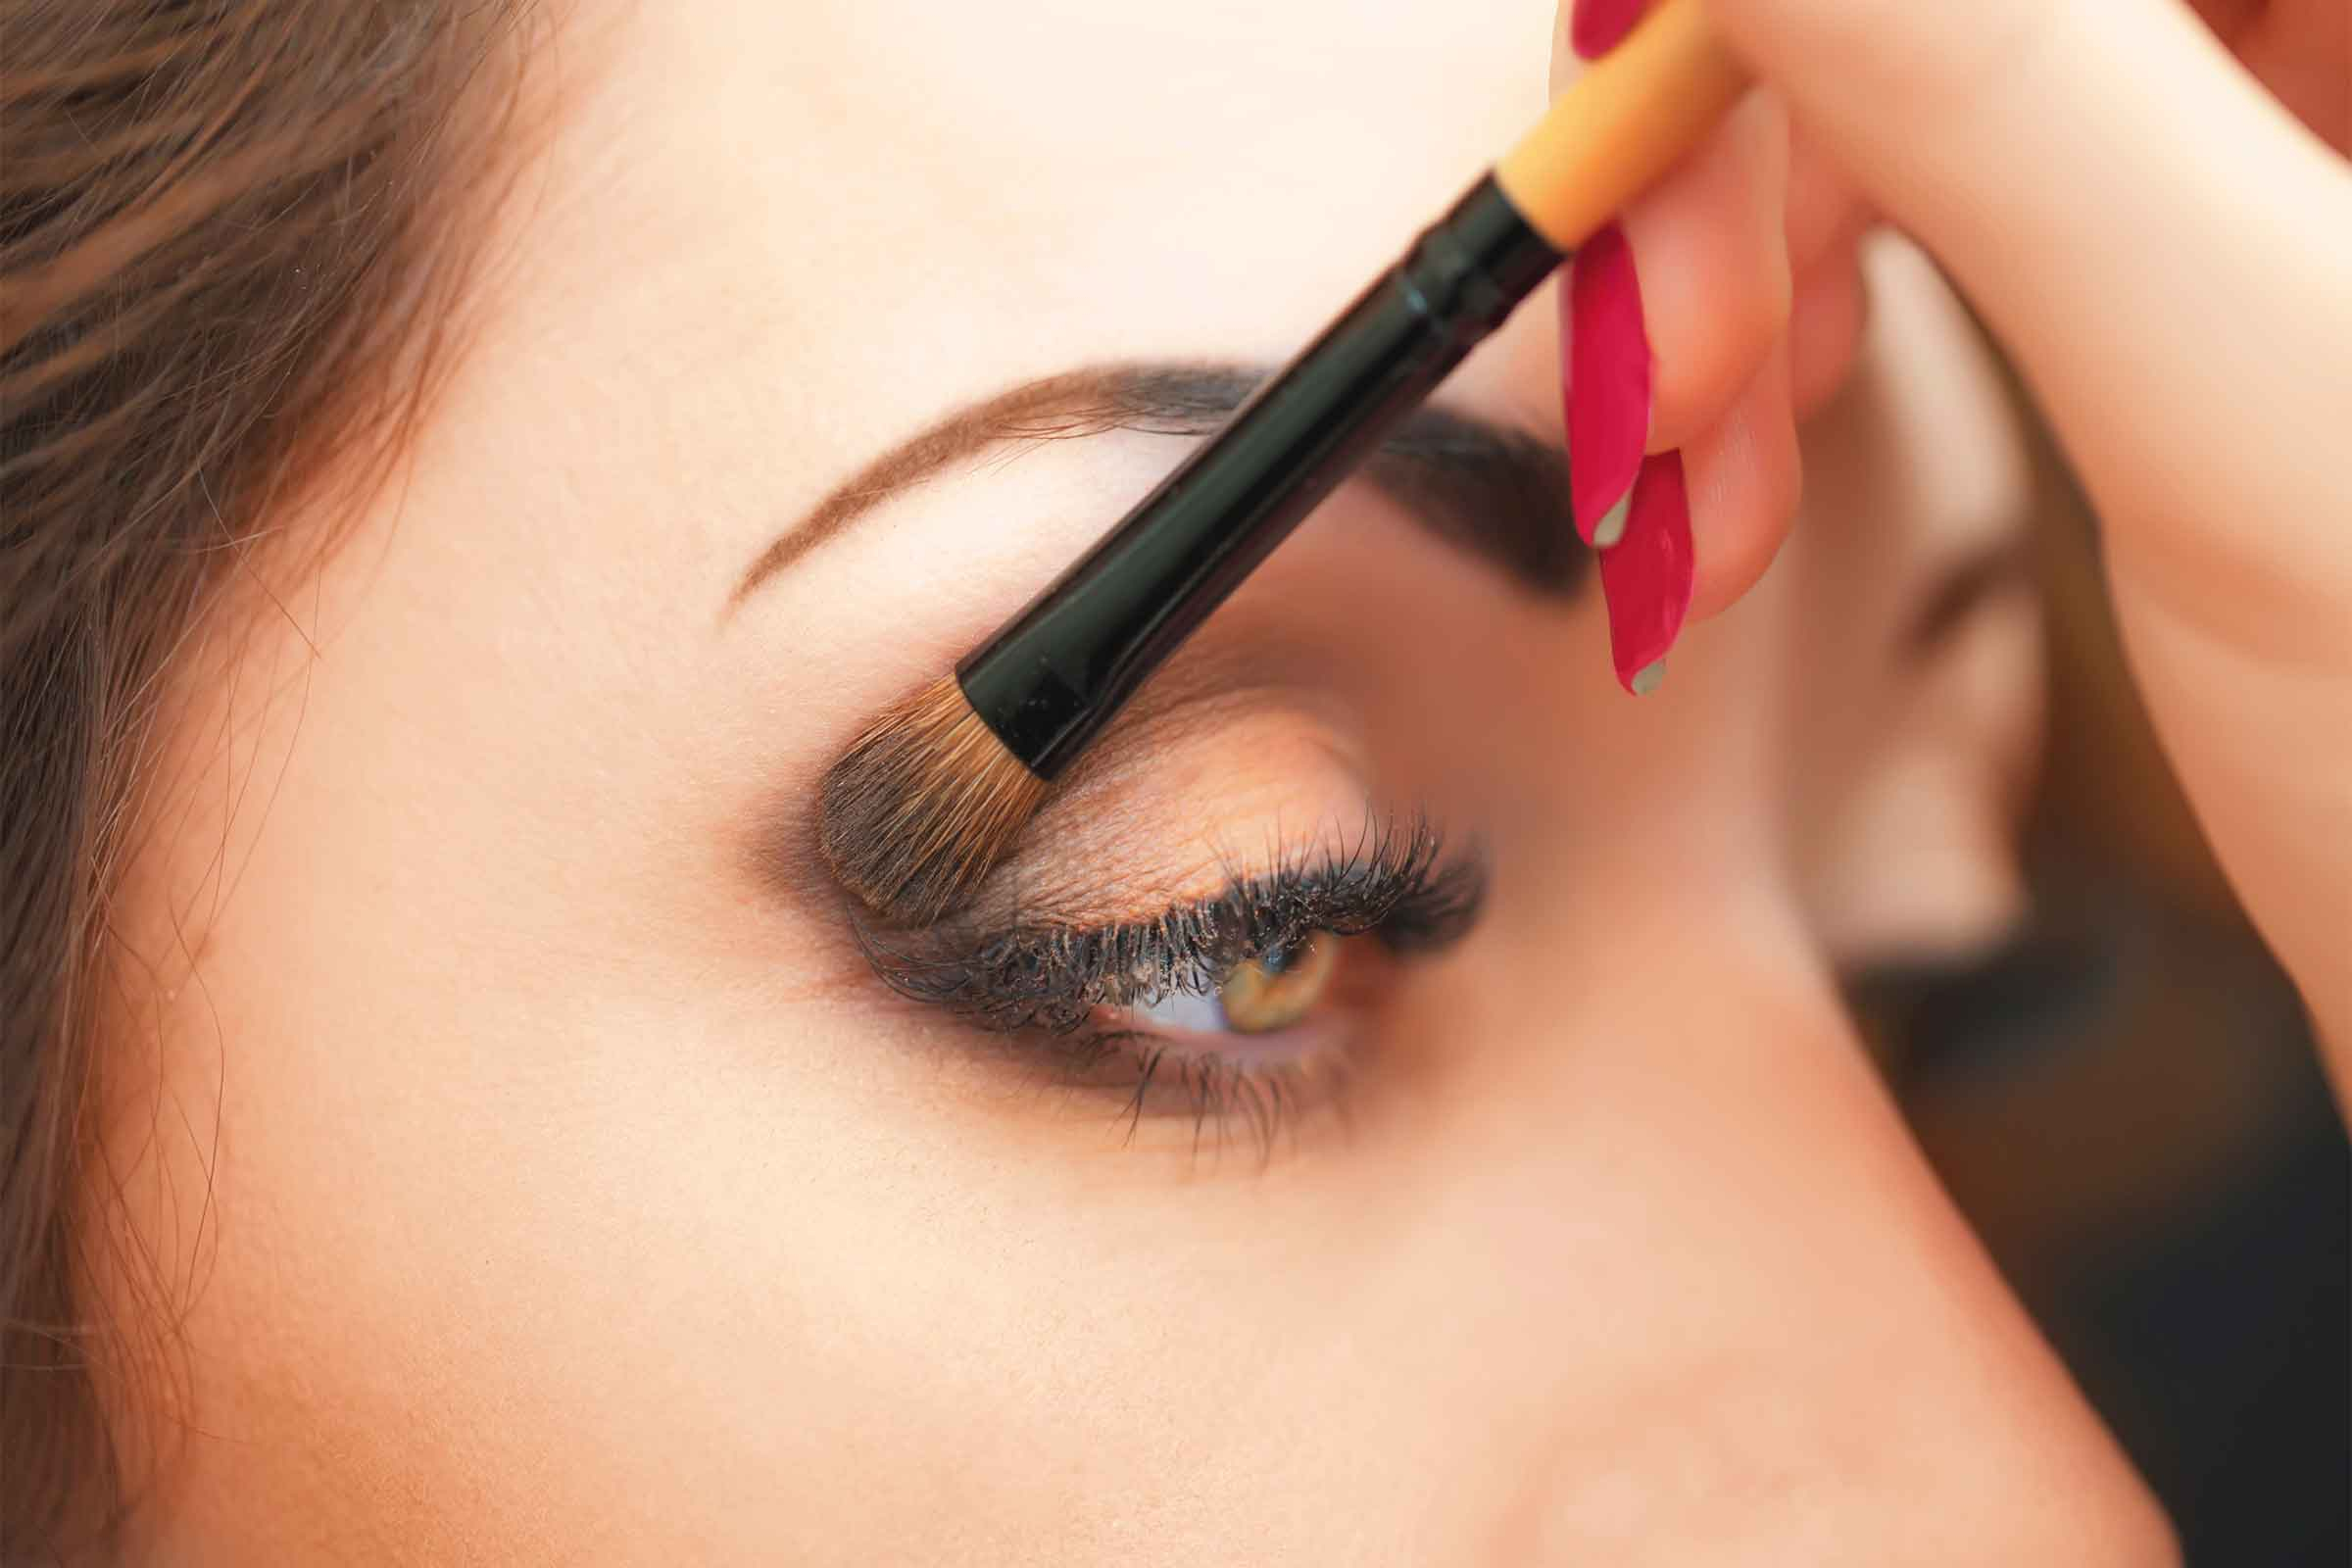 Eyes With Makeup Eye Makeup Tips 7 Ways To Make Your Eyes Pop Readers Digest